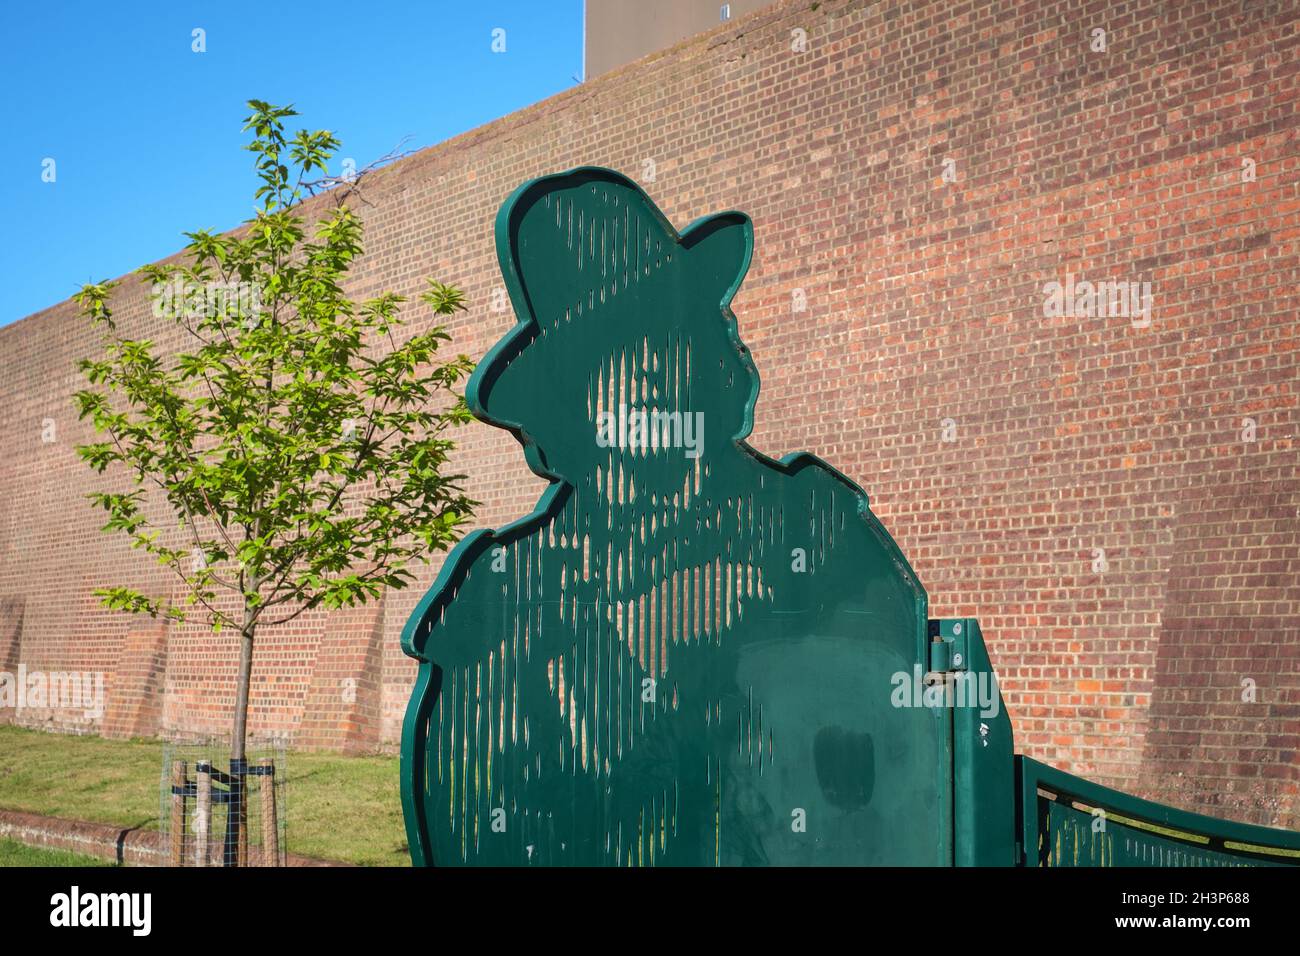 A distinctive representation of Oscar Wilde on the canal path by Reading Prison in Berkshire by the Kennet & Avon Canal Stock Photo